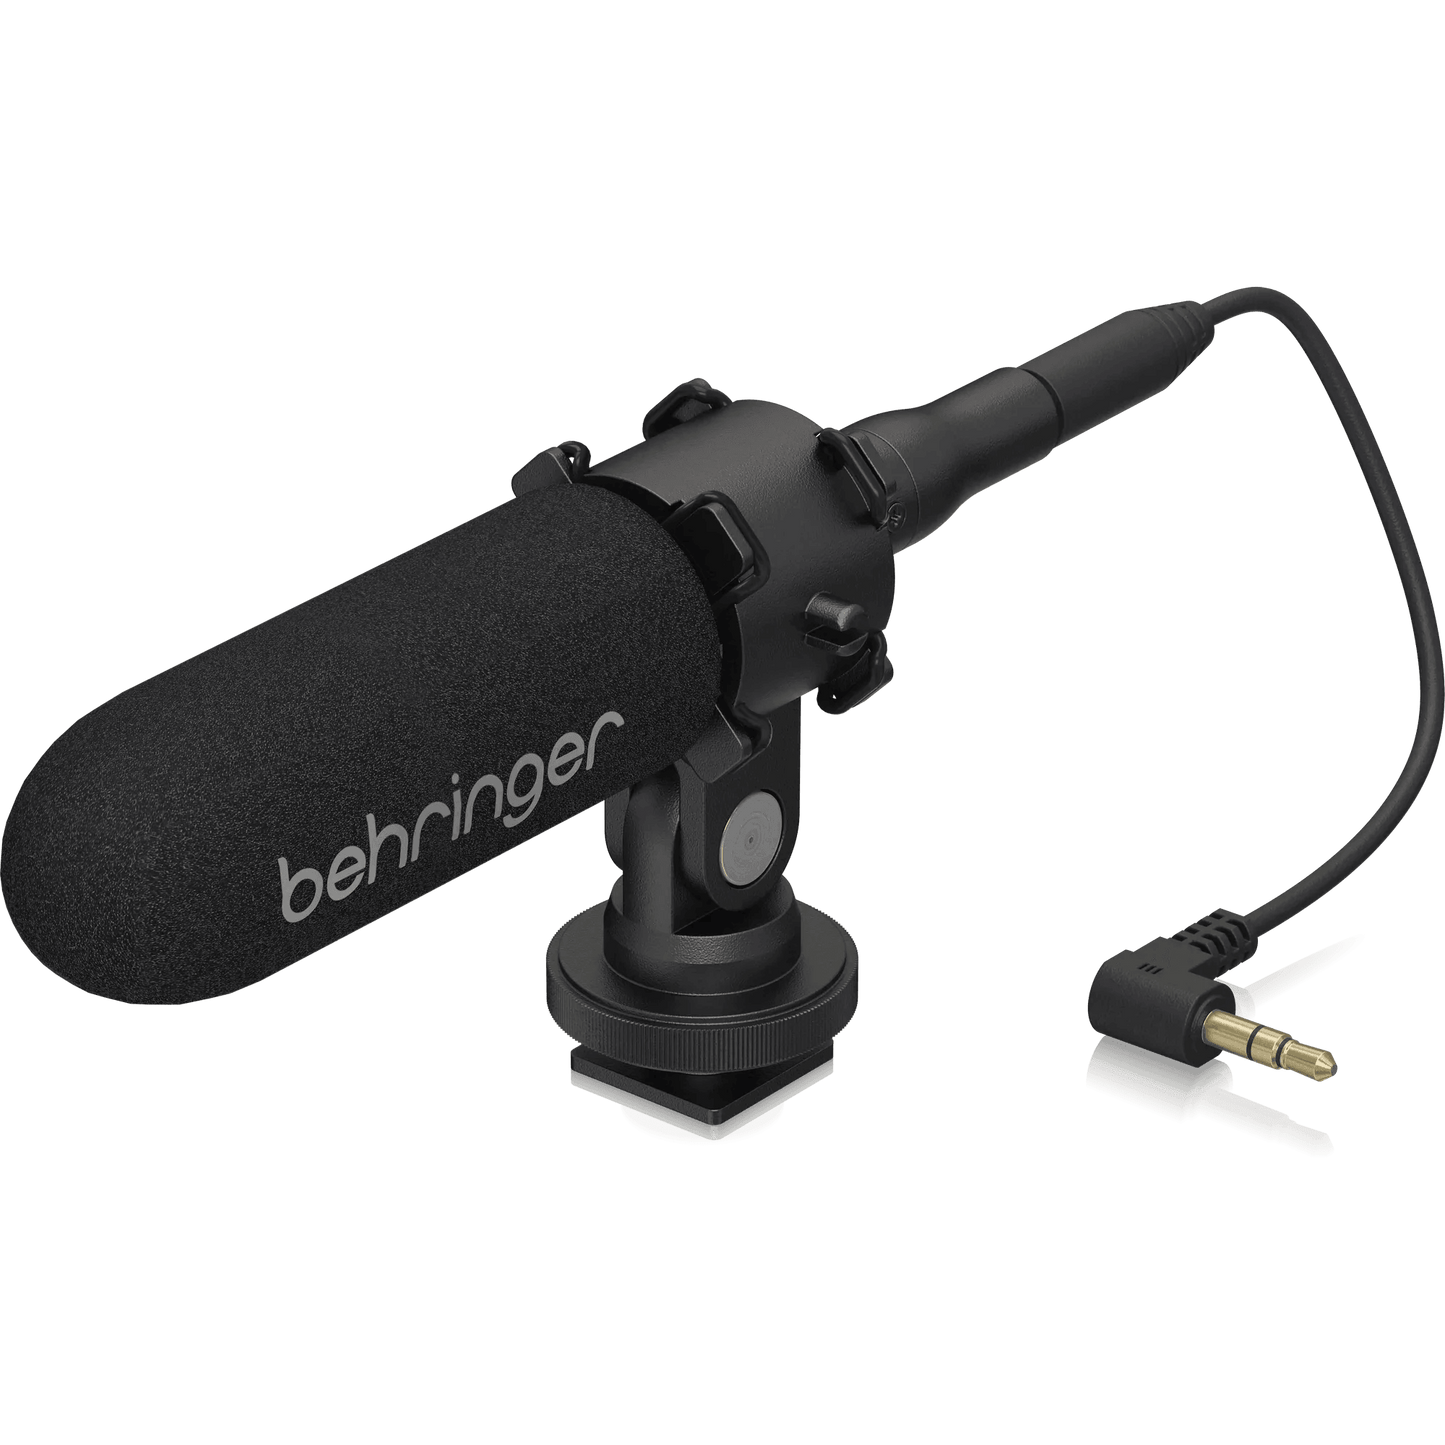 Behringer Video Mic Condenser Microphone for Video Camera Applications